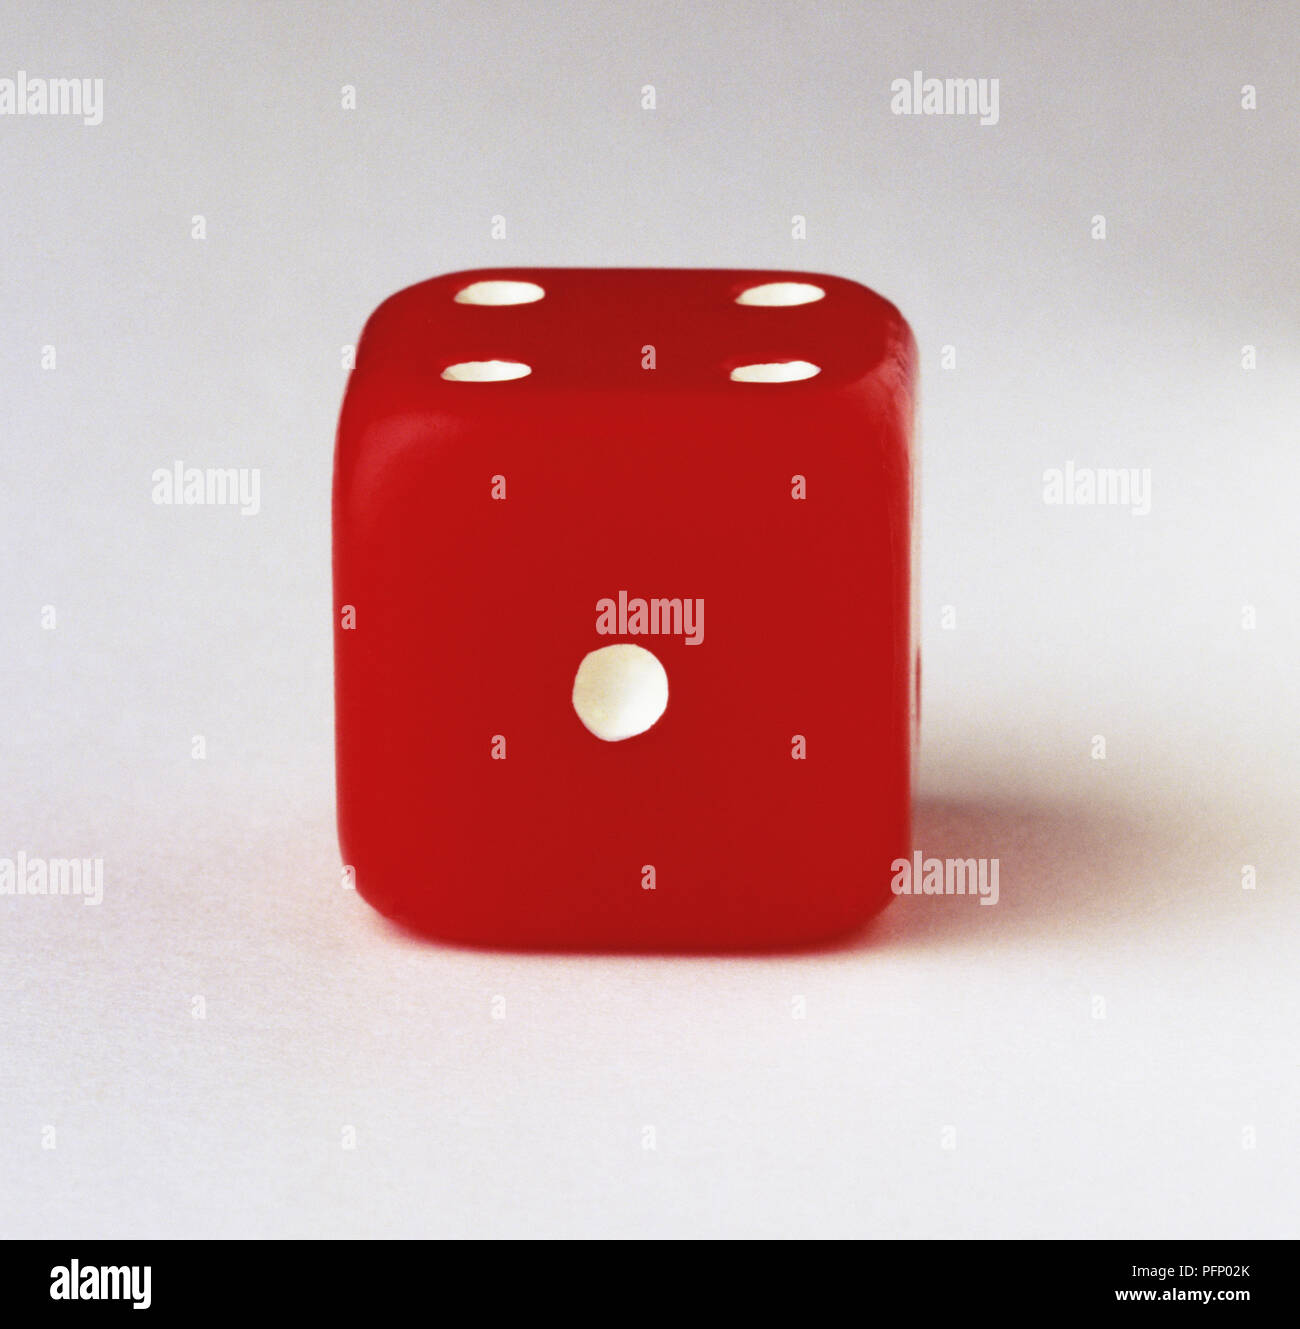 Red dice with one-dot side facing the camera, close up Stock Photo